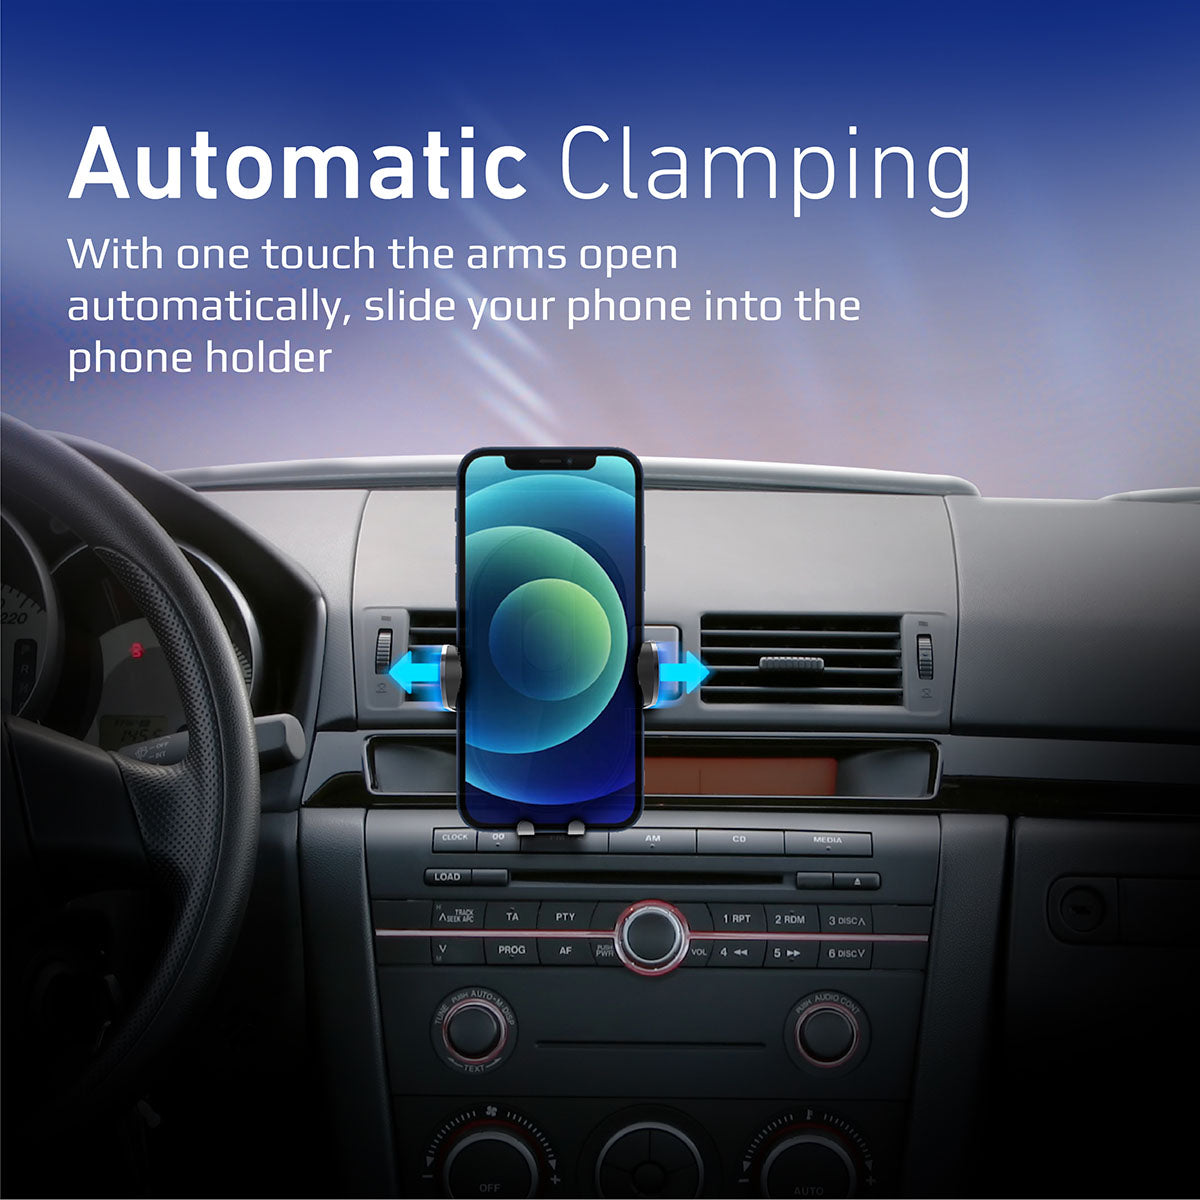 Promate Wireless Car Charger Mount, 15W Qi Fast Charging Auto-Clamping Dashboard Air Vent Phone Holder with Smart Coil Alignment, FOD Detection and Multi-Angle Support for iPhone 12/11, Galaxy S21/S20, PowerMount-15W